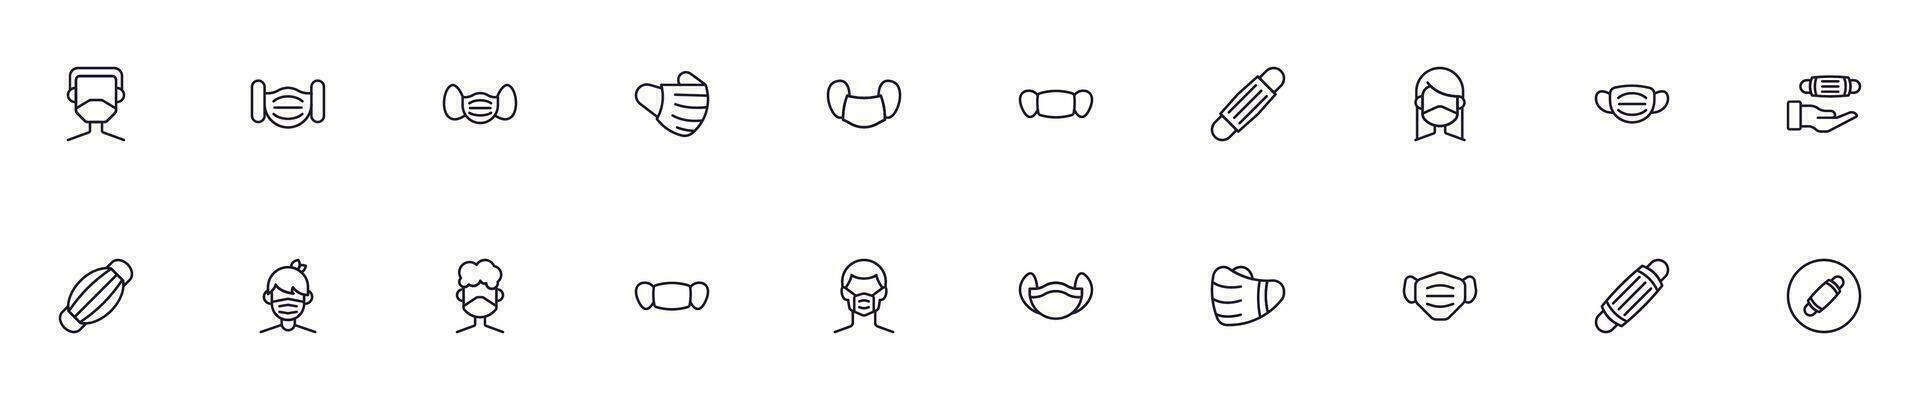 Facemask concept. Health line icon set. Collection of vector signs in trendy flat style for web sites, internet shops and stores, books and flyers. Premium quality icons isolated on white background